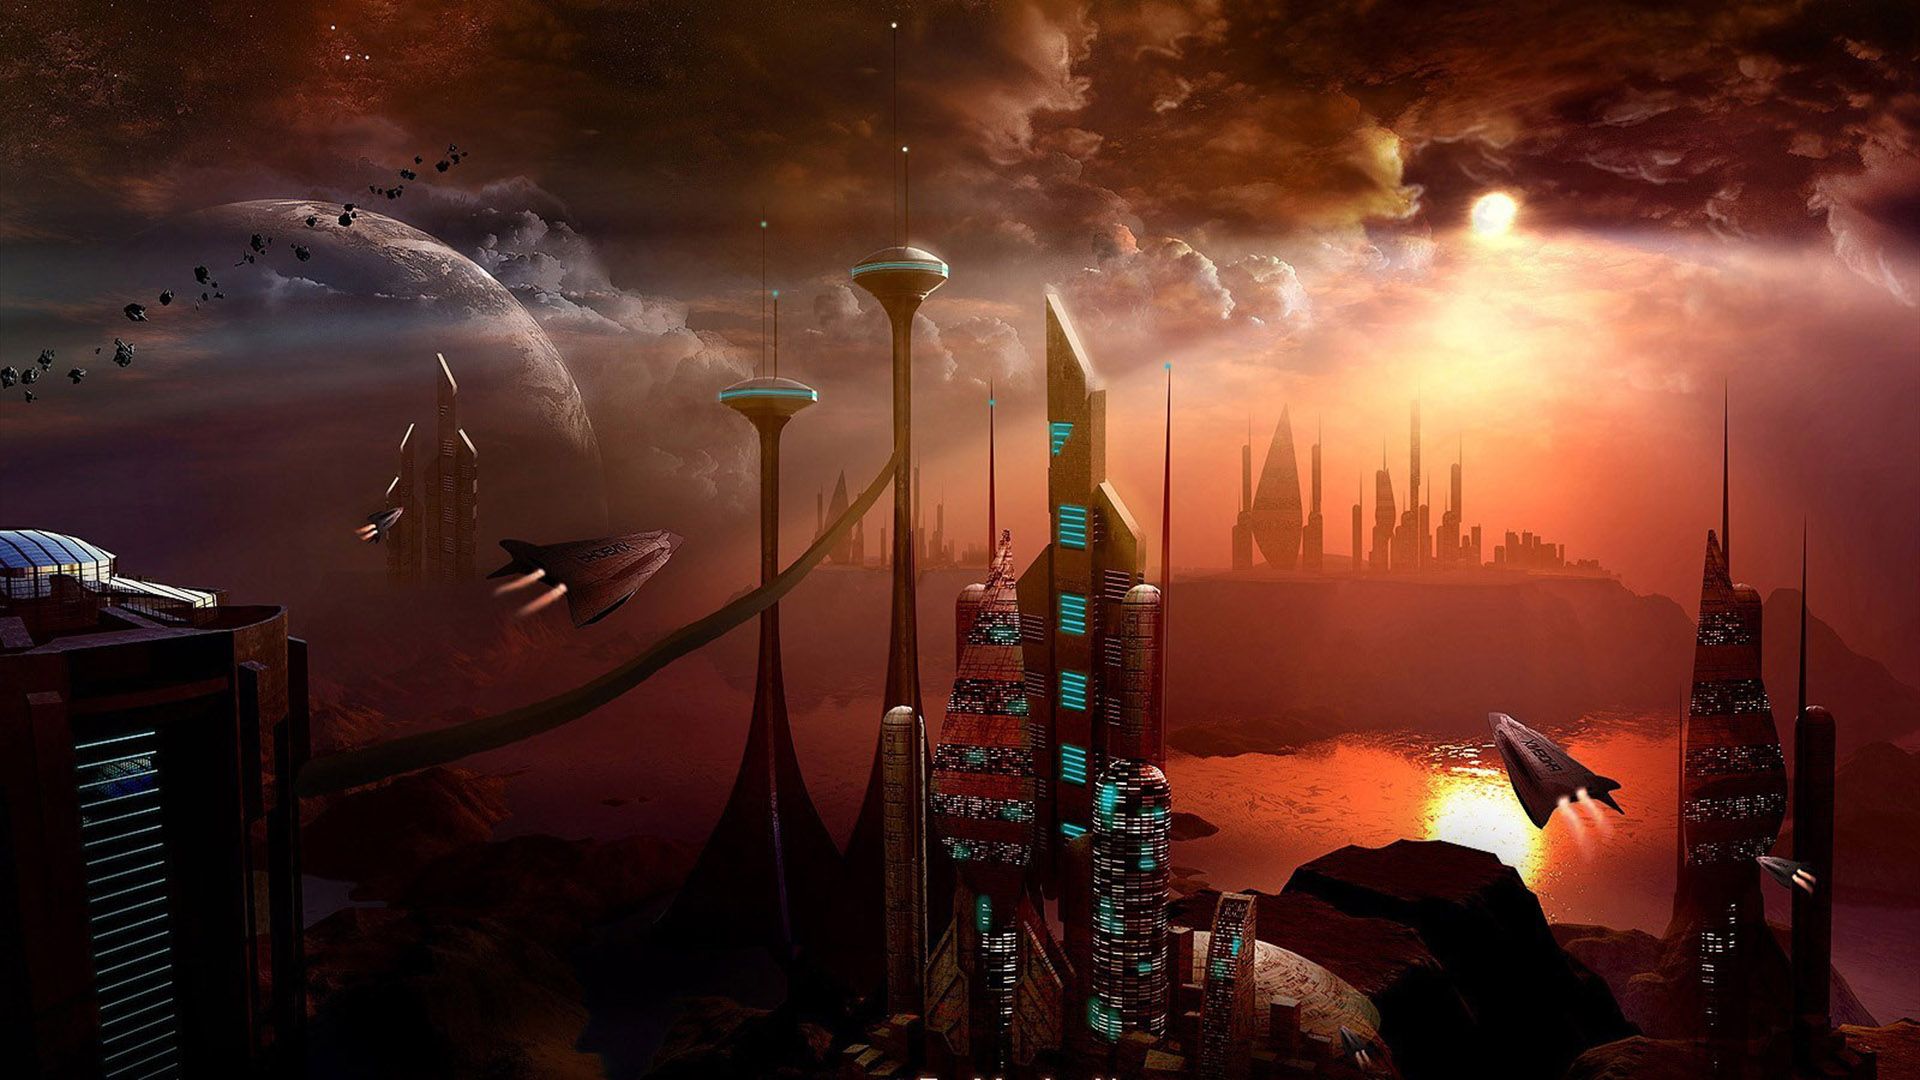 s Science Fiction Art Background